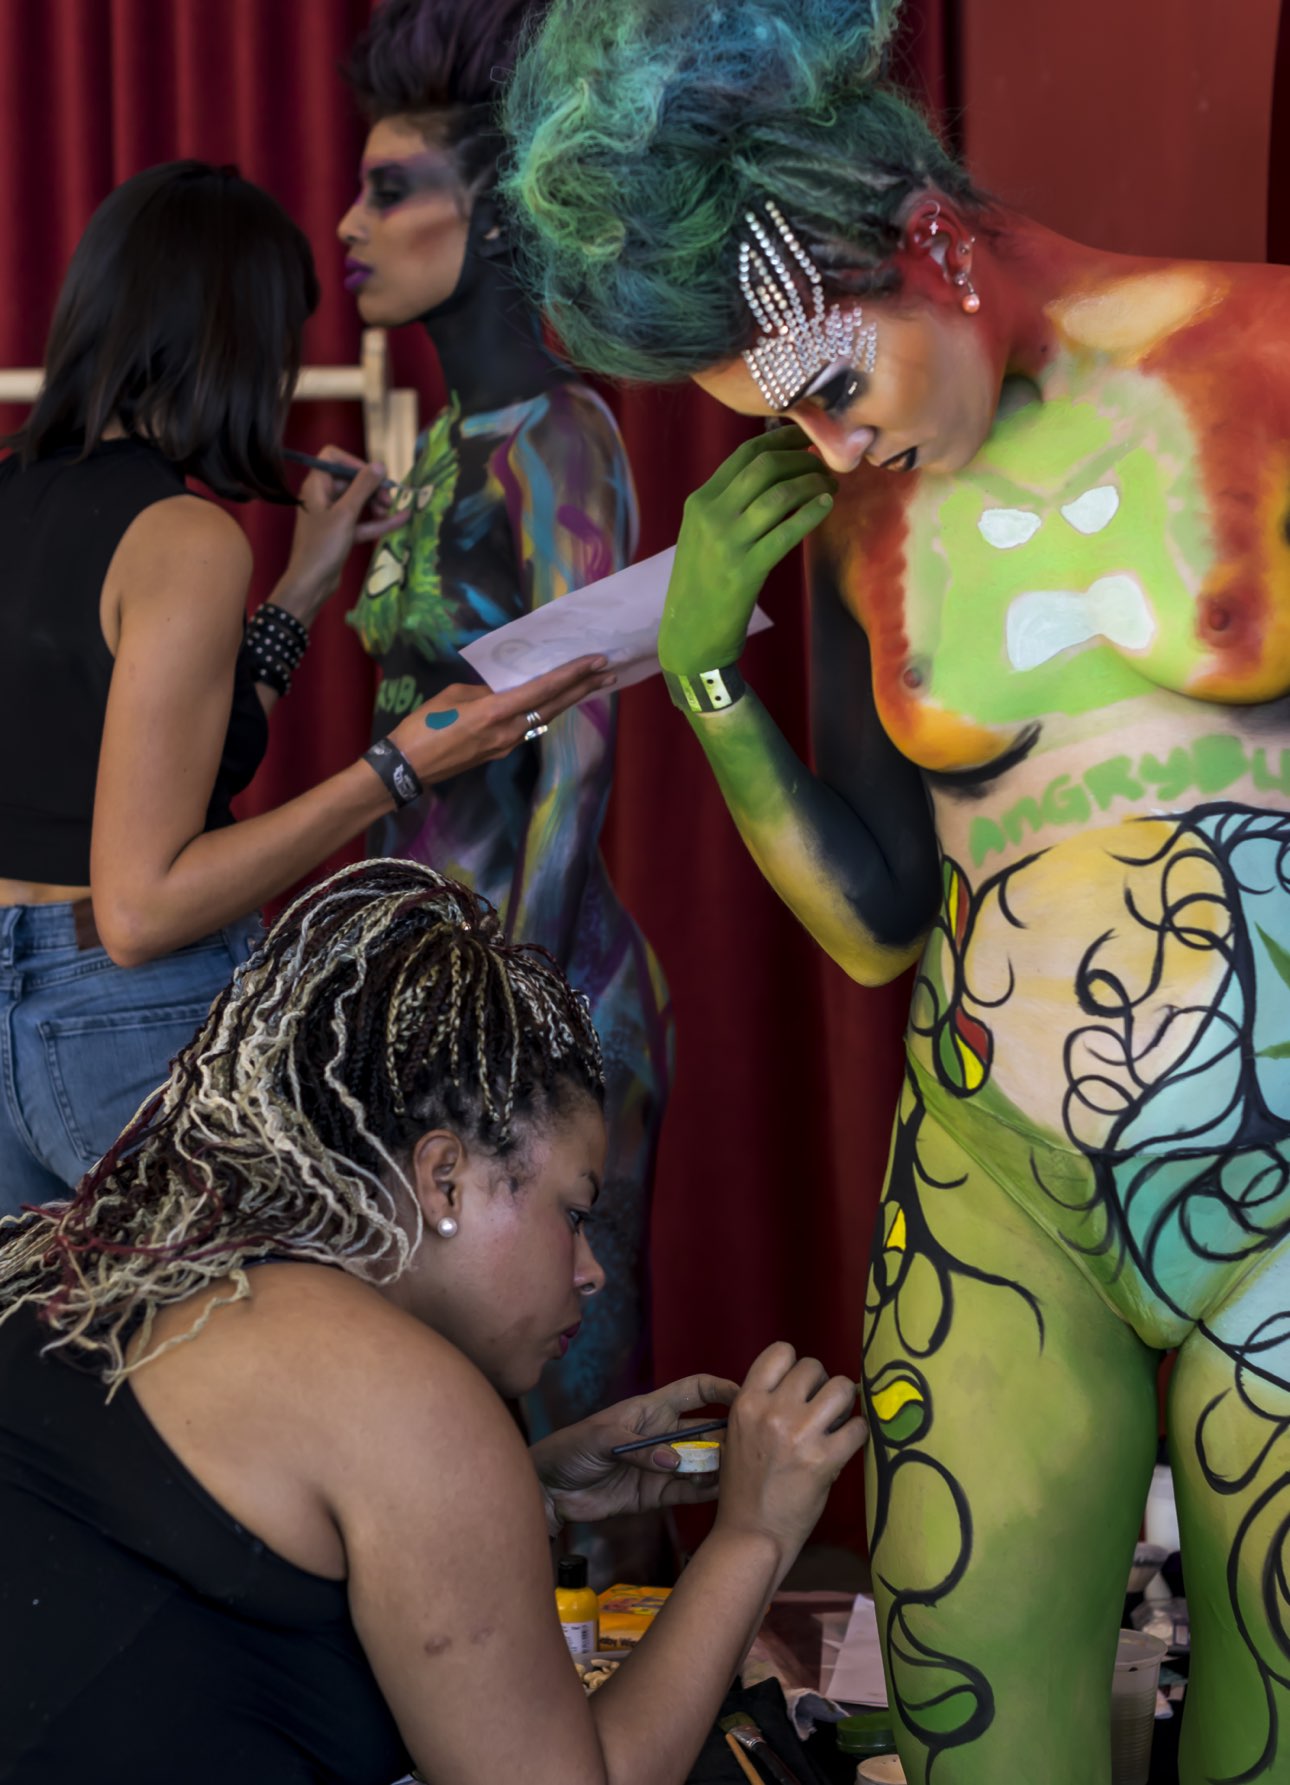 bodyart and bodyartists in the cannabis show